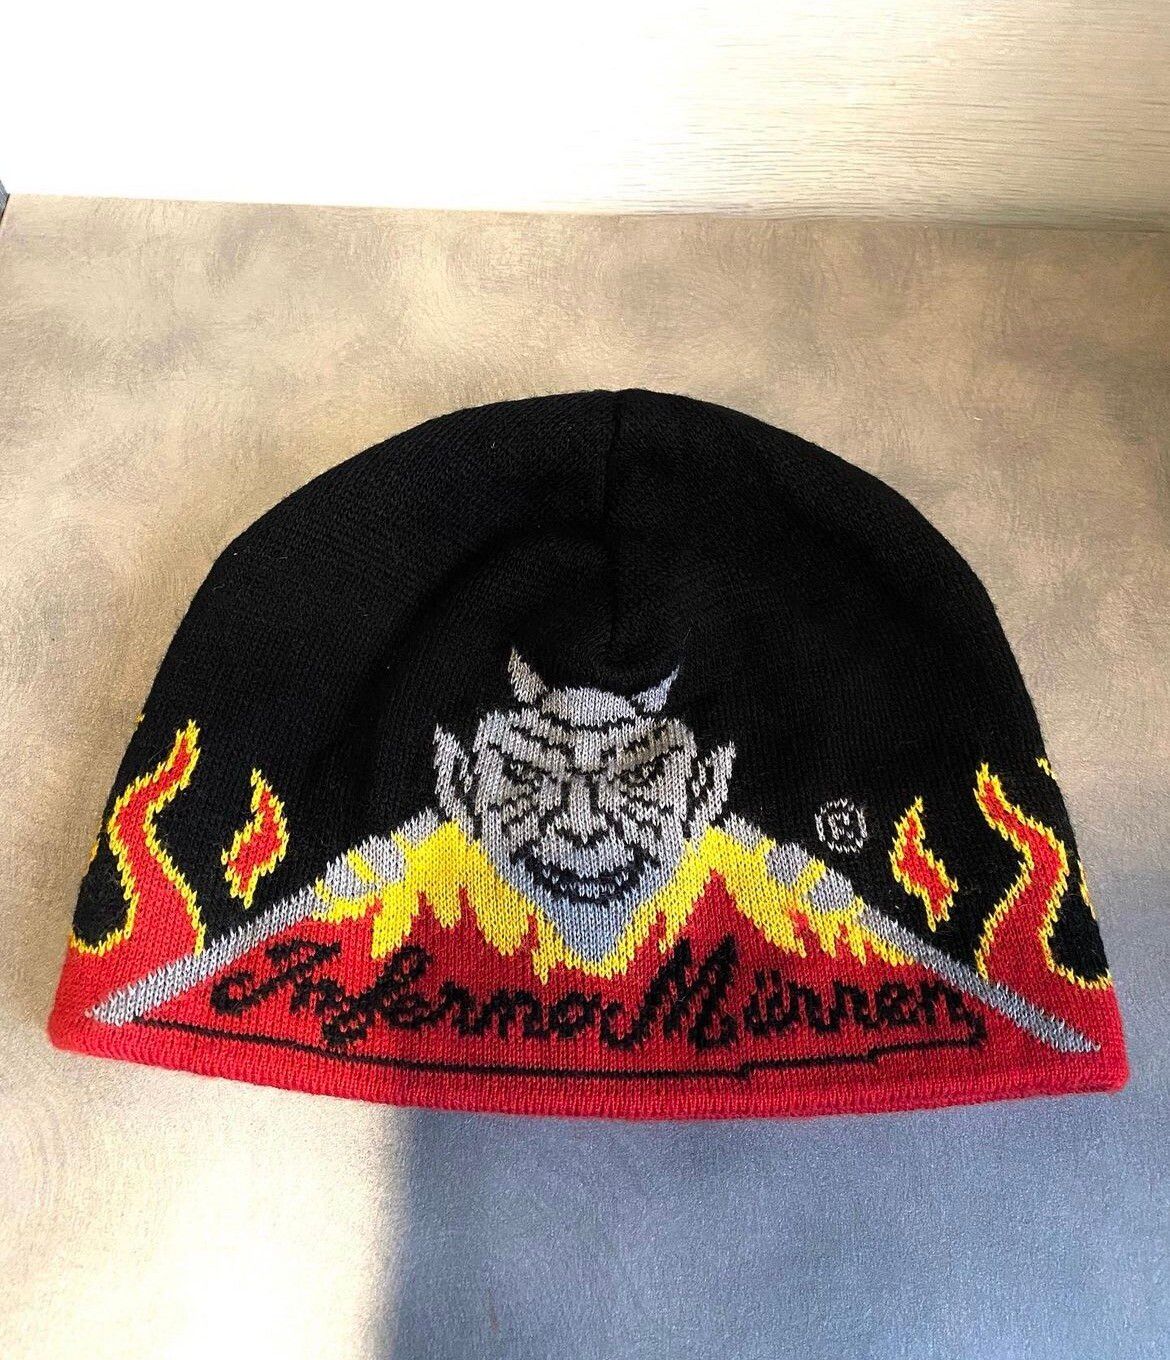 Pre-owned Hat X Vintage Fire Flames Graphic Skull Hell Black Hat Cap